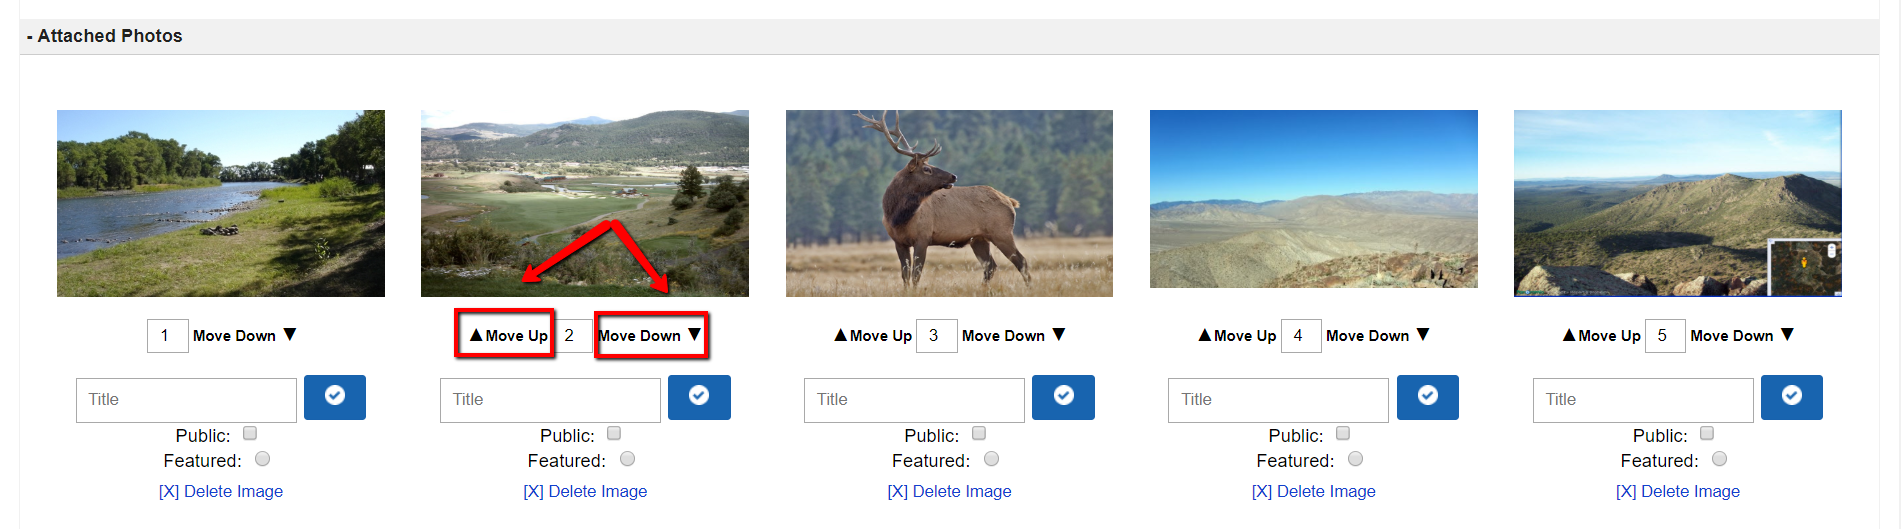 How To Add Images and Rearrange The Order of Your Images On Your Listing